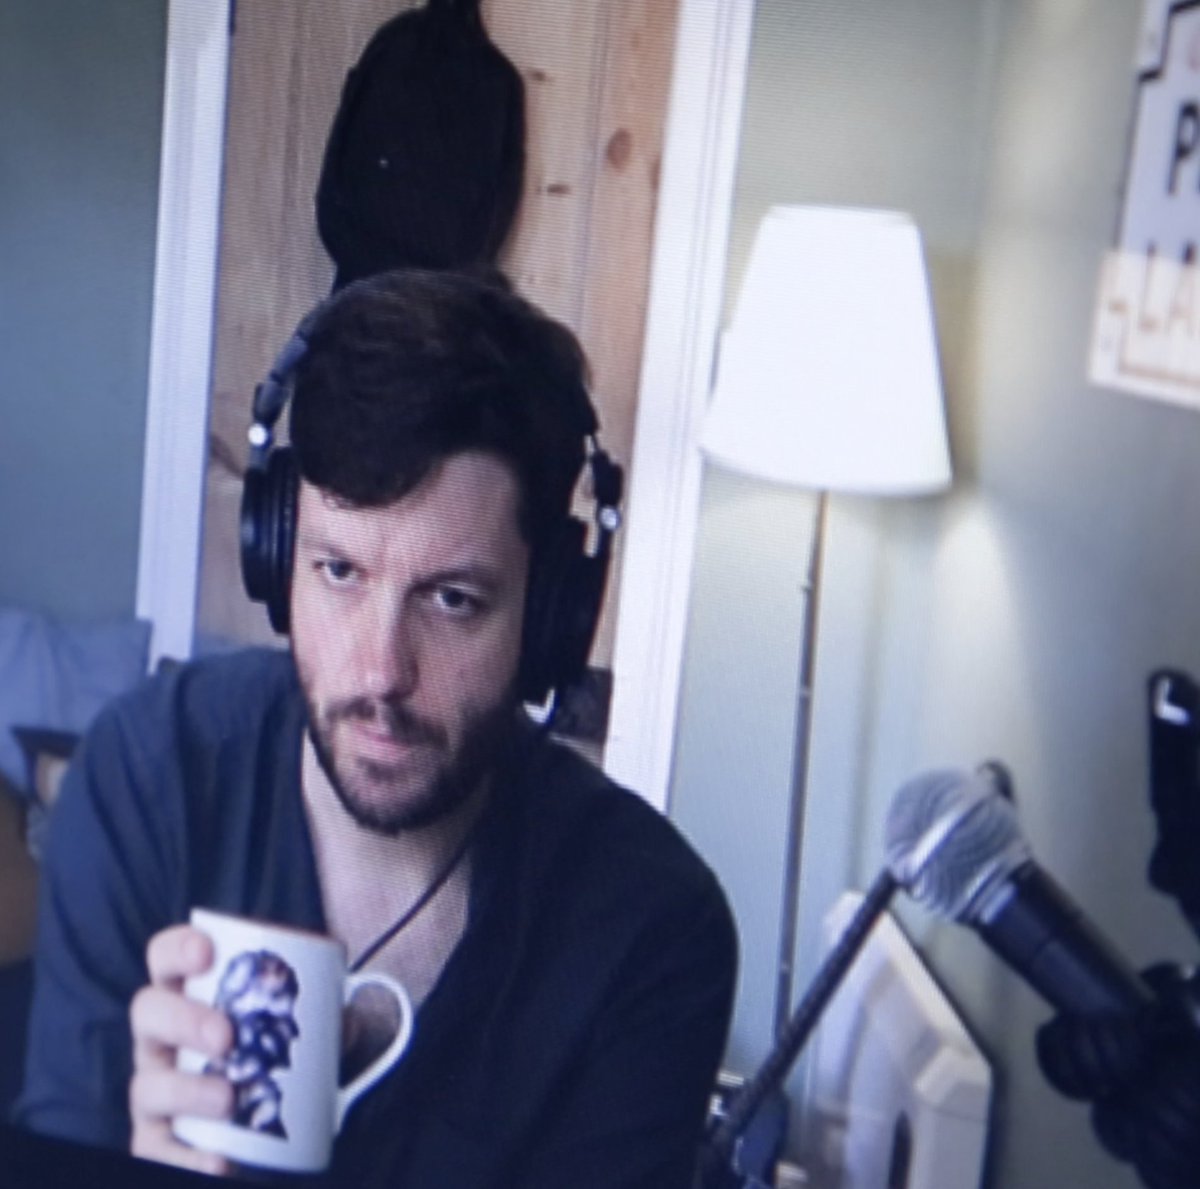 4) The guys recorded the session on video and got a shot of me on the skype call drinking out of my Doctor Who mug which was TOTALLY a coincidence. Honest! #DoctorWho  #TheEdgeOfTime